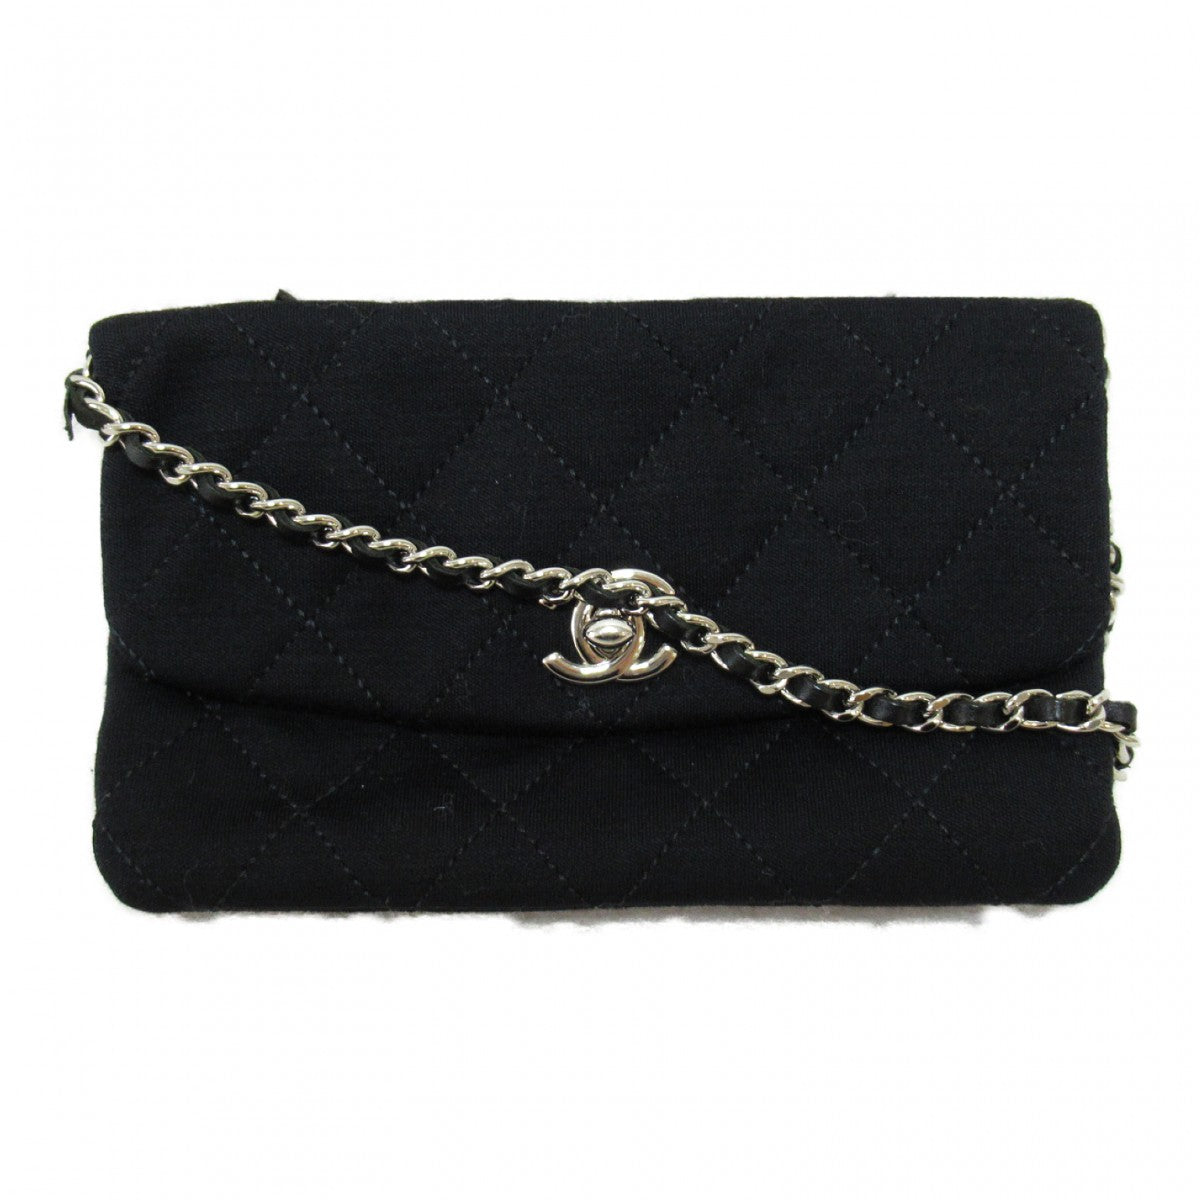 MIni Quilted Jersey Flap Bag